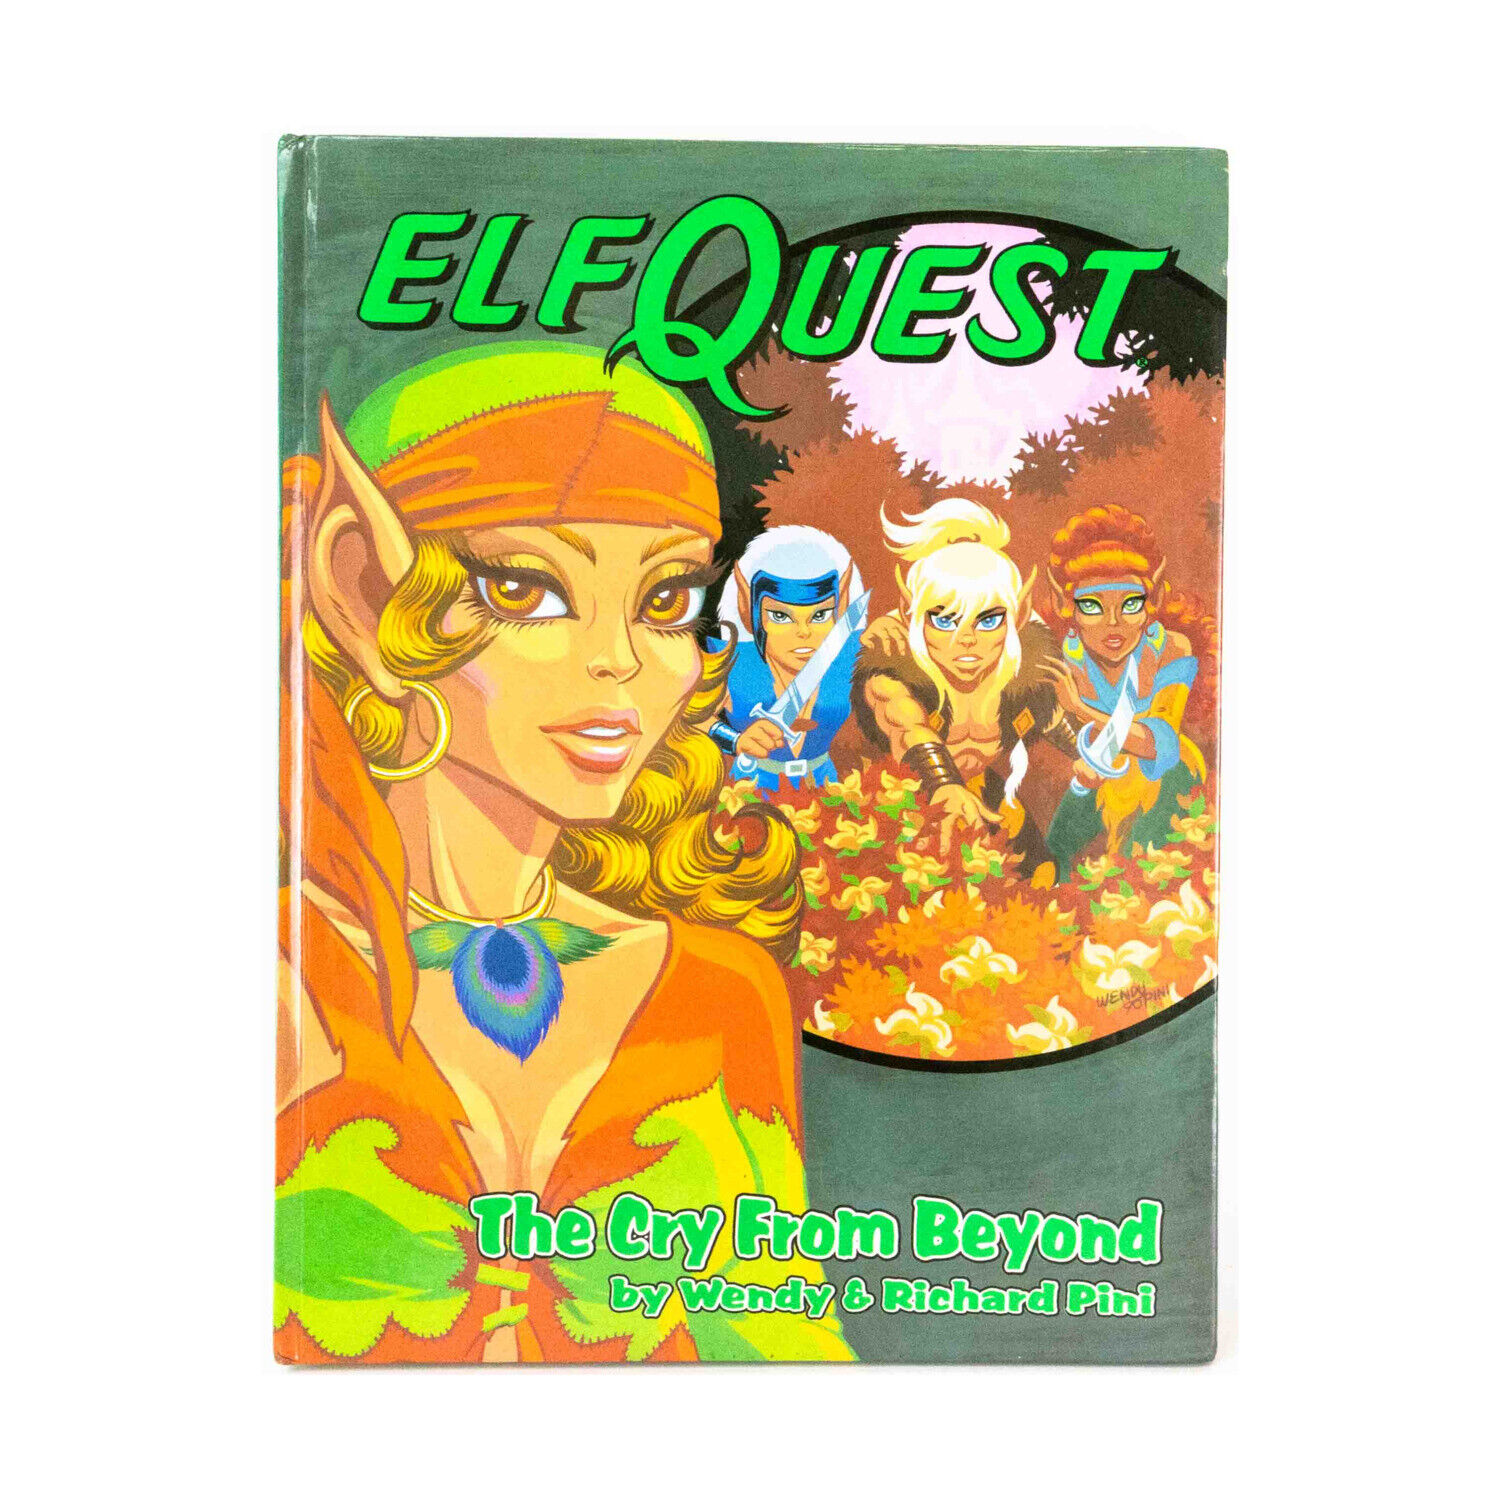 Father Tree Press Elfquest Elfquest Vol. 7 - The Cry From Beyond VG+